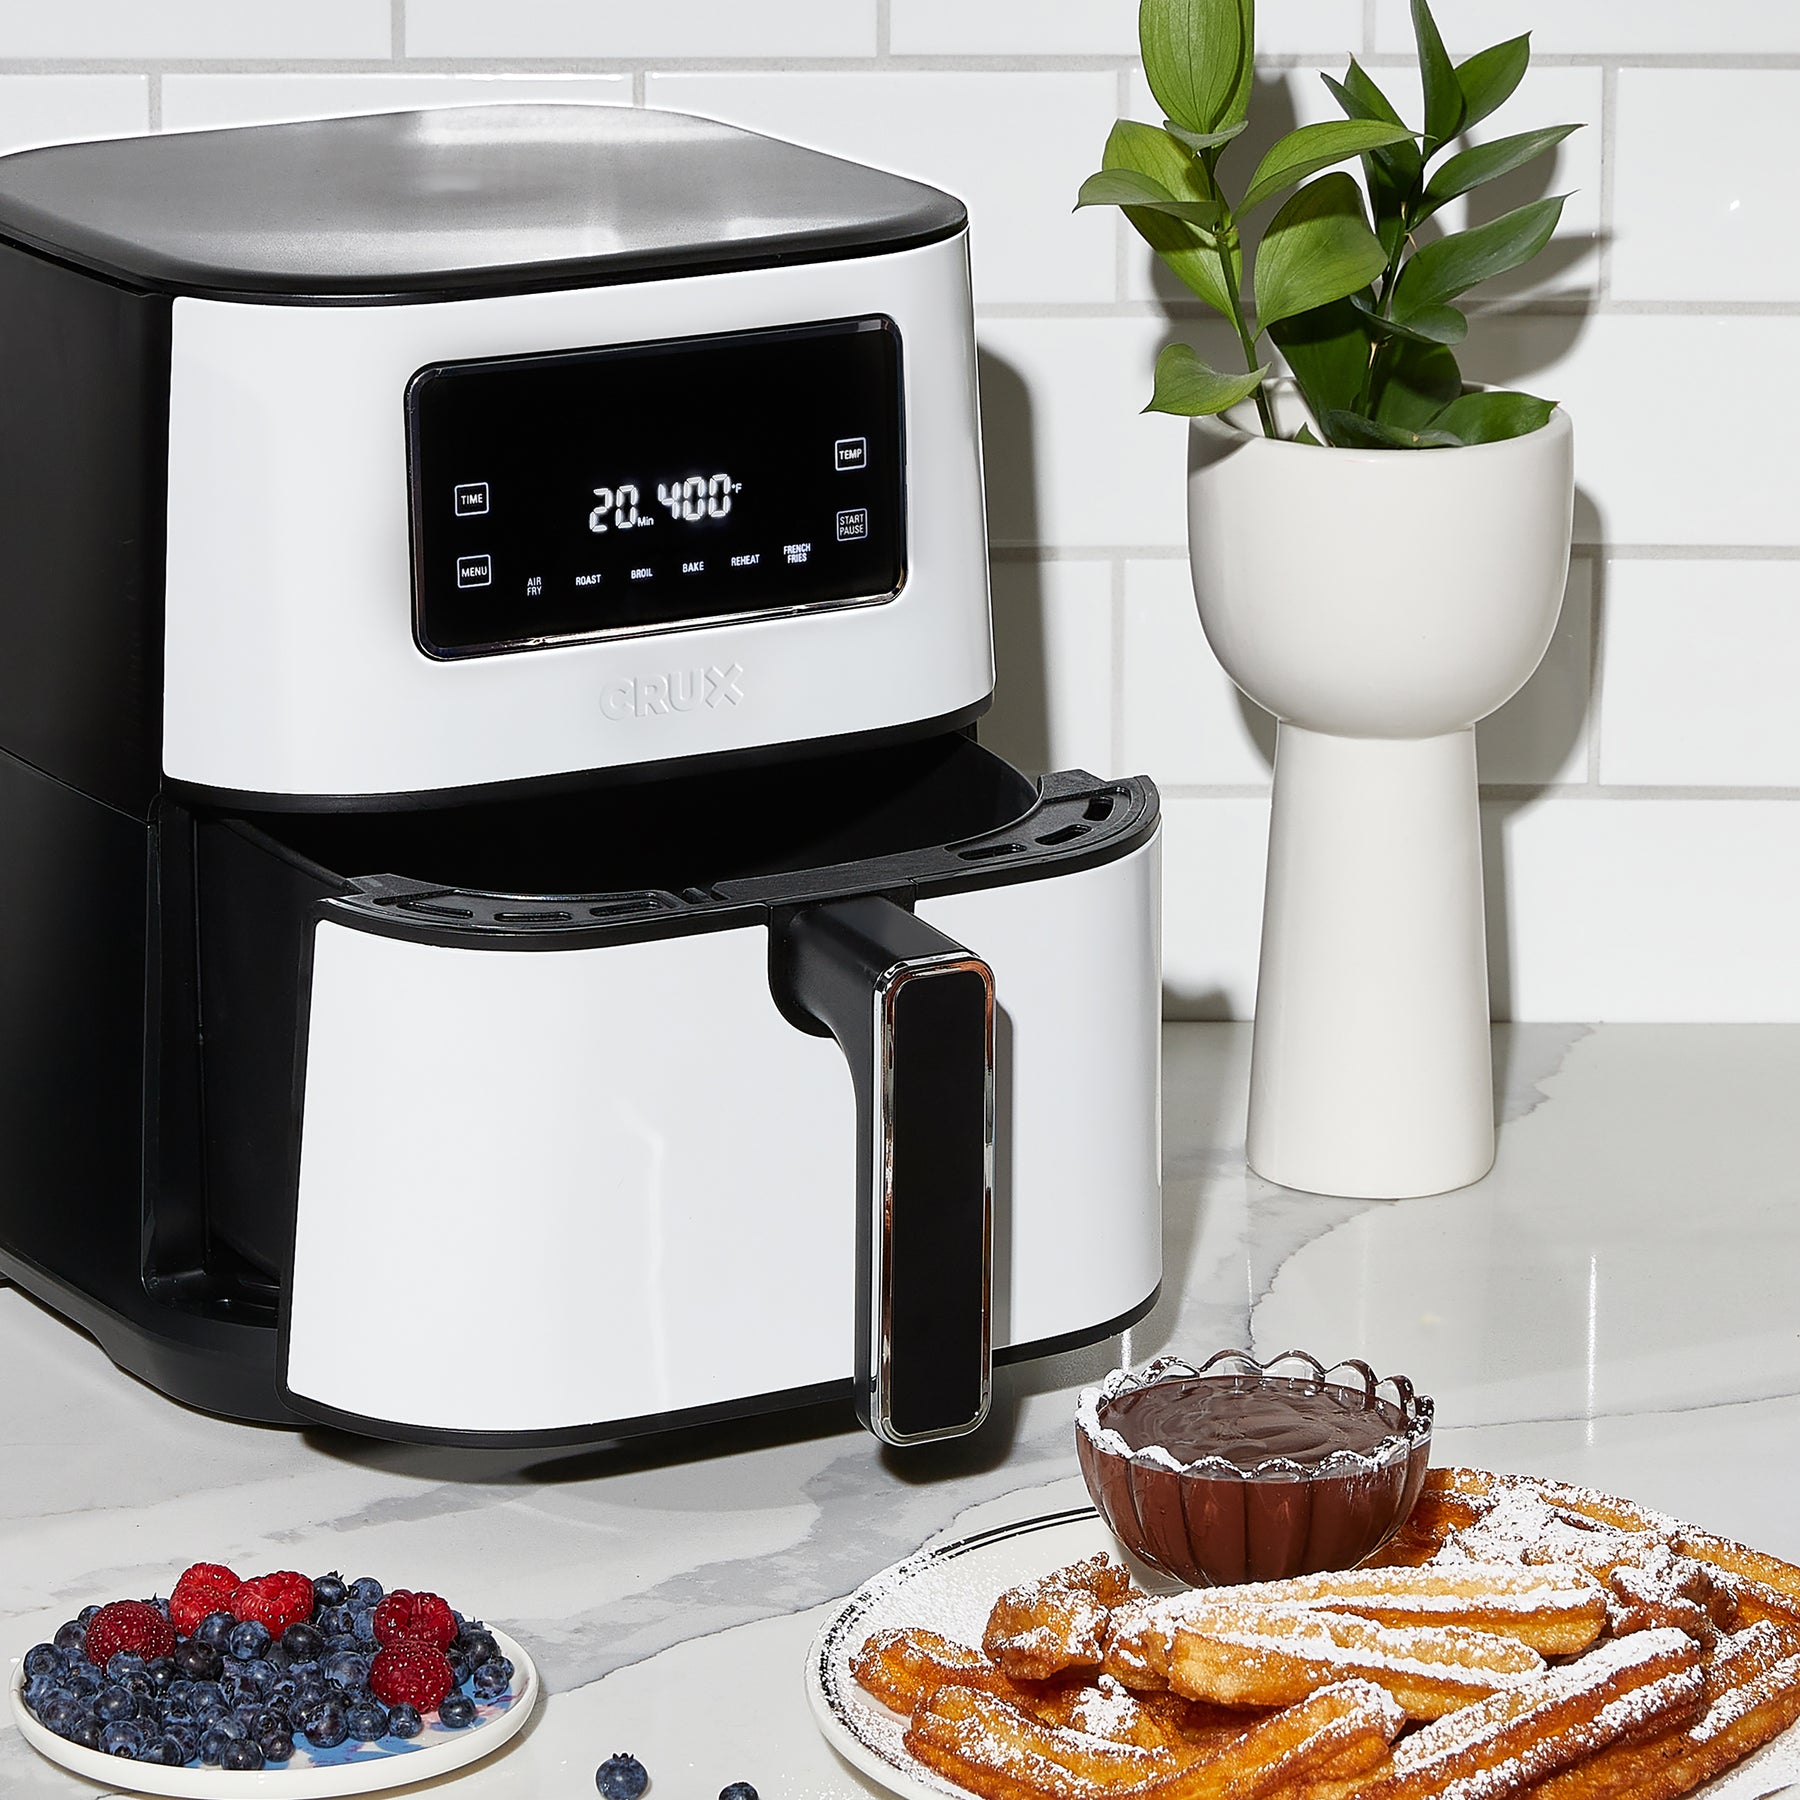 Crux 6 Qt. Digital Air Fryer 1500 Watt - Stainless Steel - The WiC Project  - Faith, Product Reviews, Recipes, Giveaways